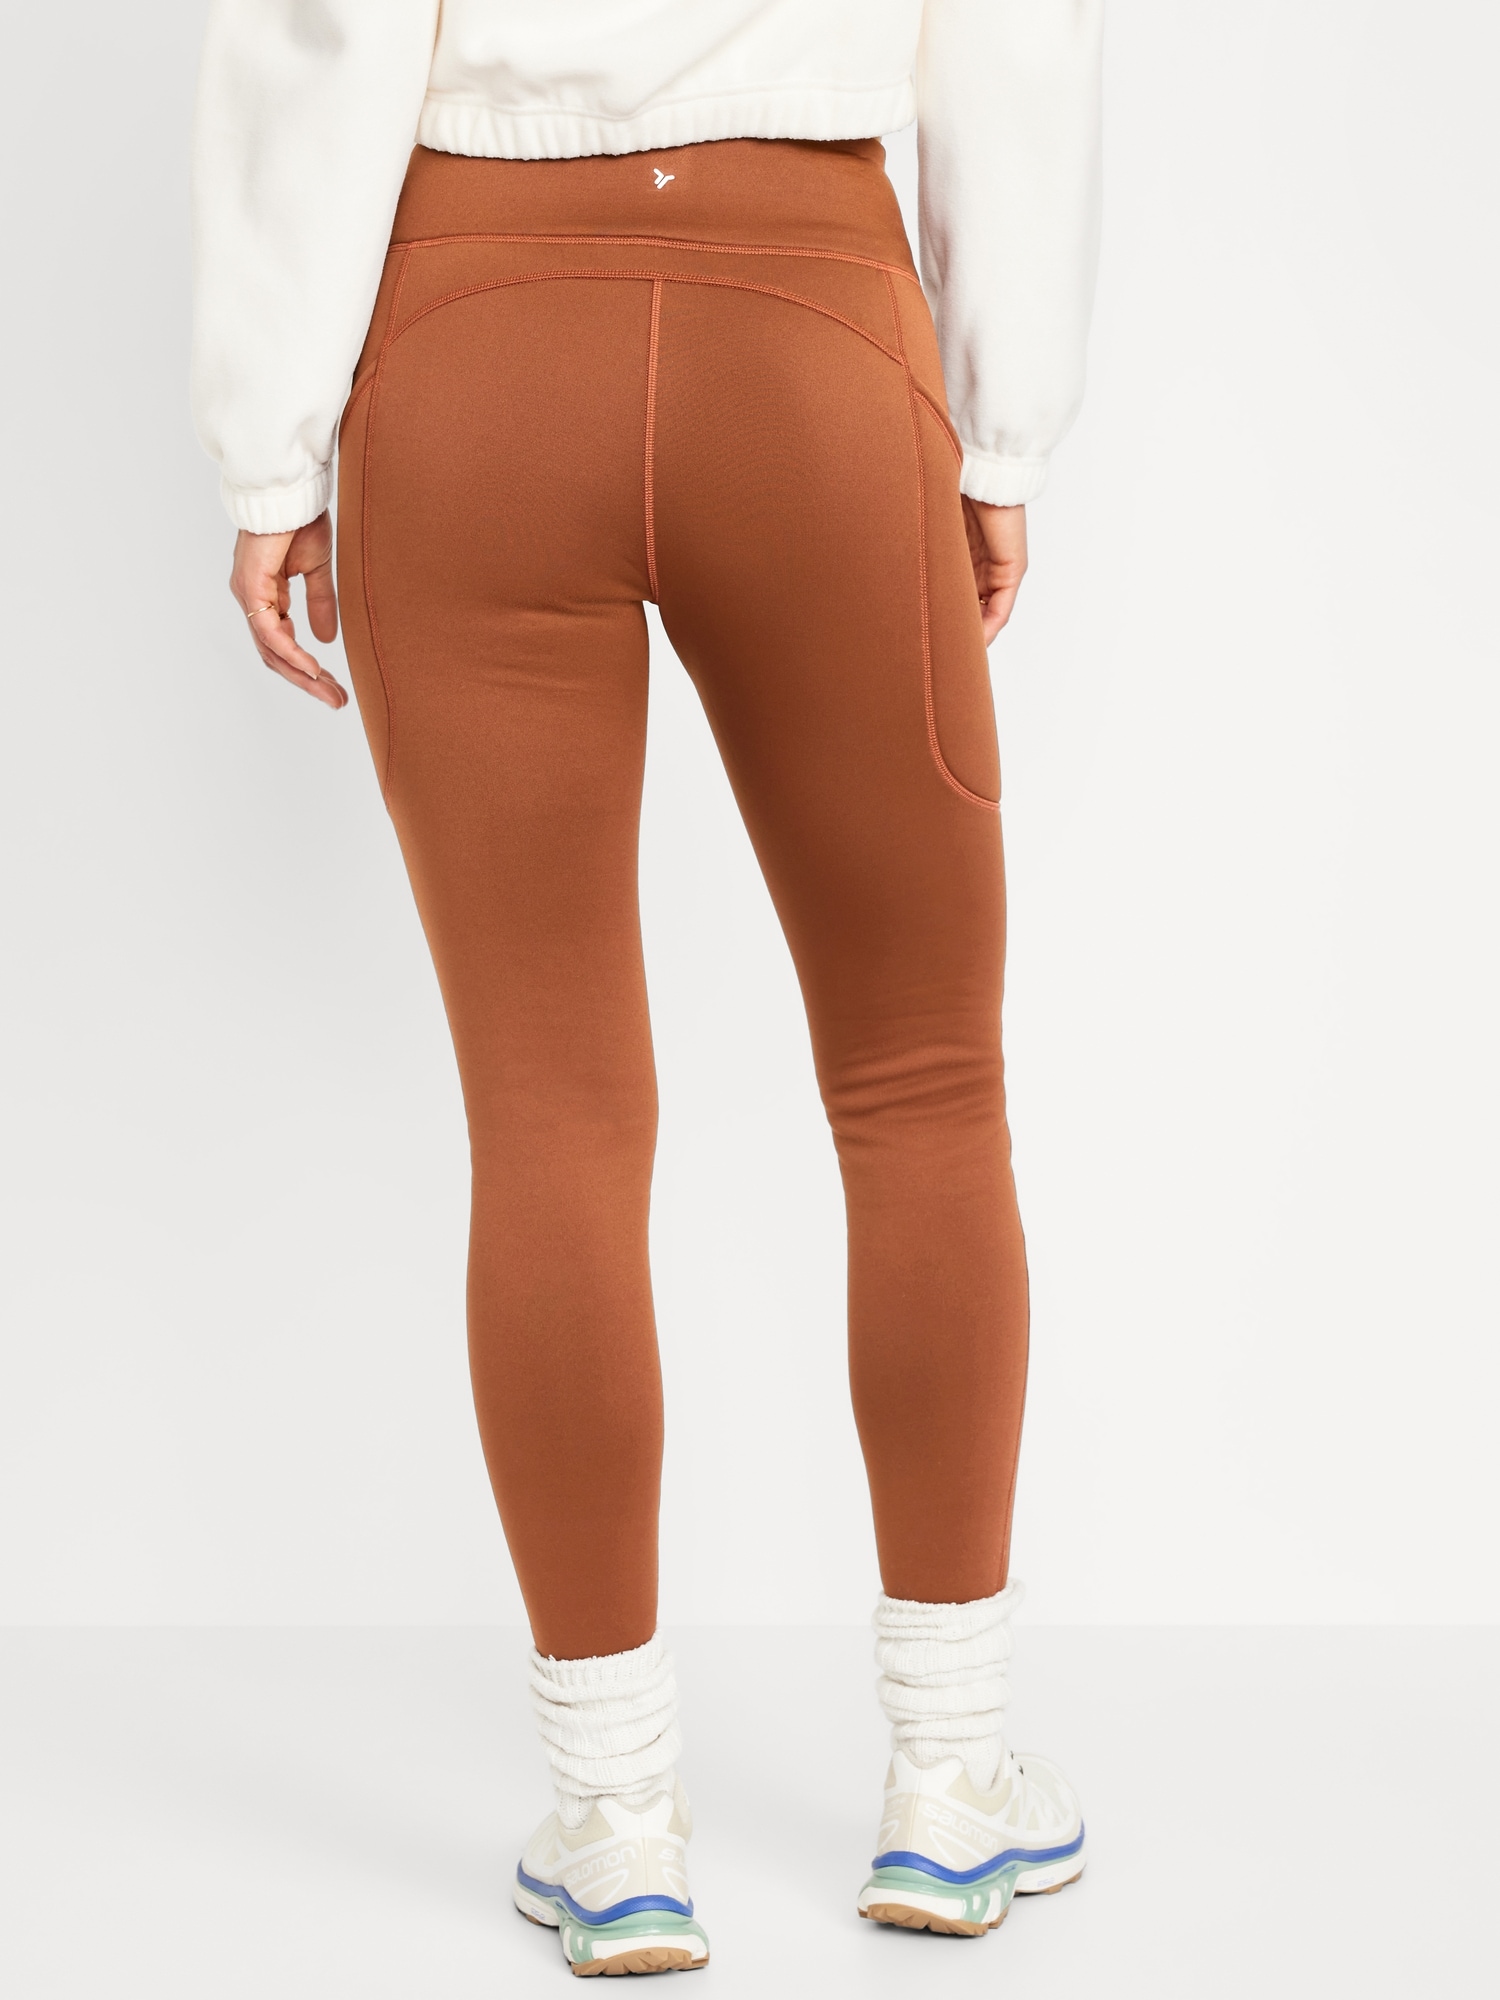 OLD NAVY High-Waisted UltraCoze Performance Leggings for Women